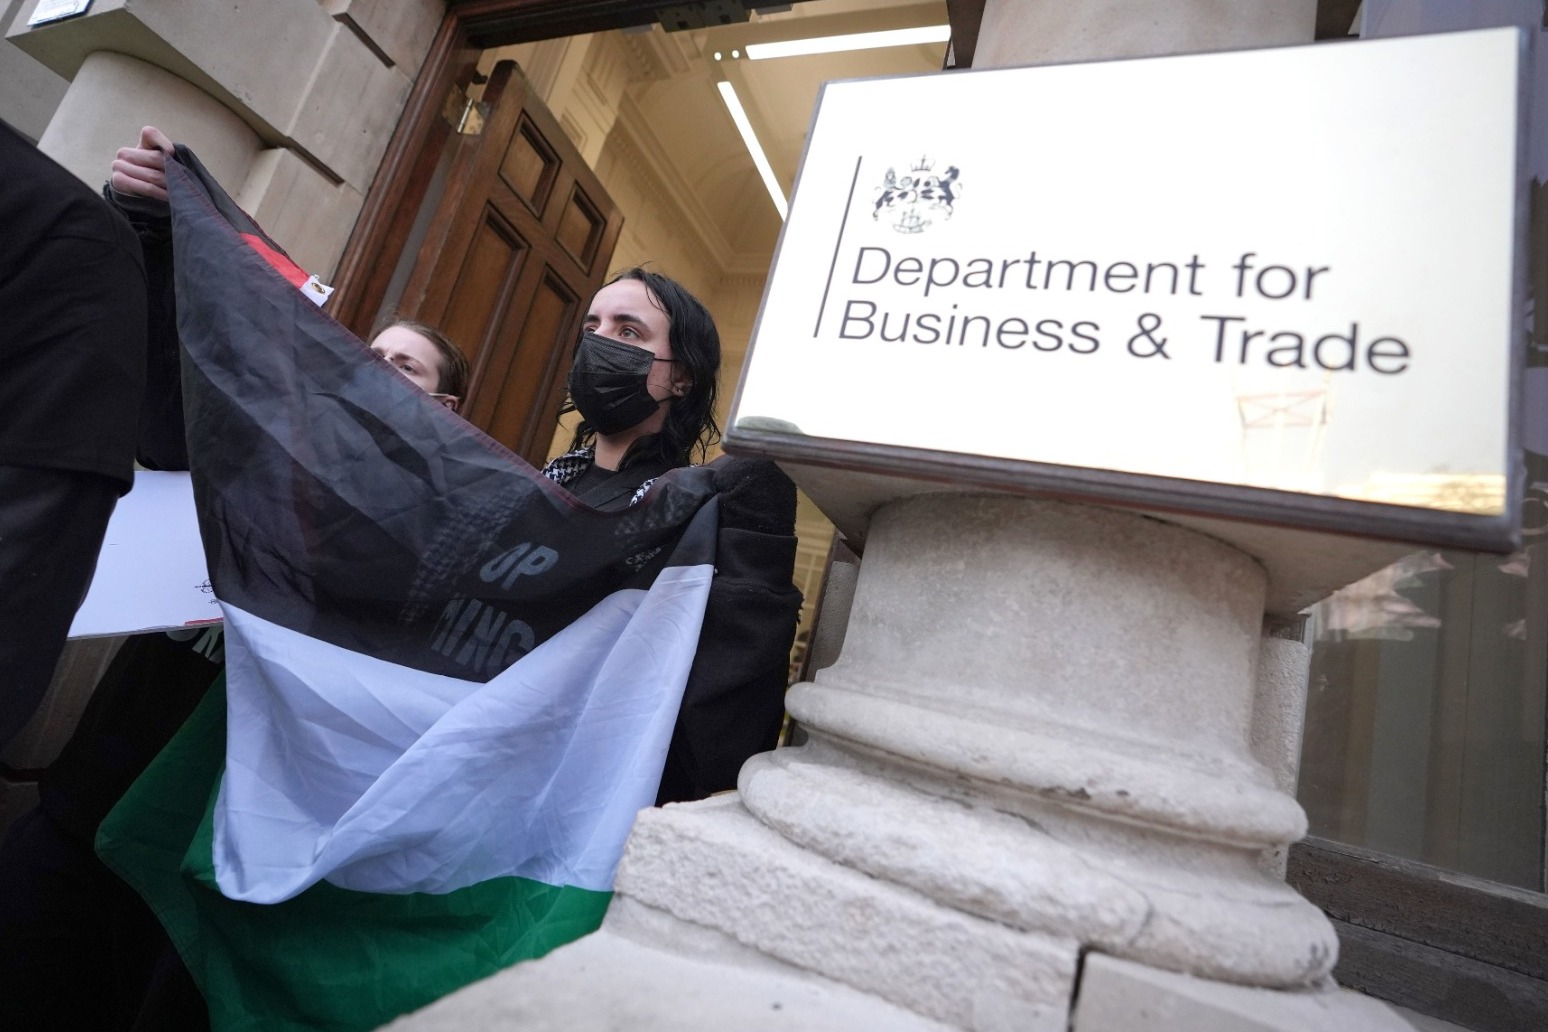 Civil servants threaten action over UK arms sales to Israel 